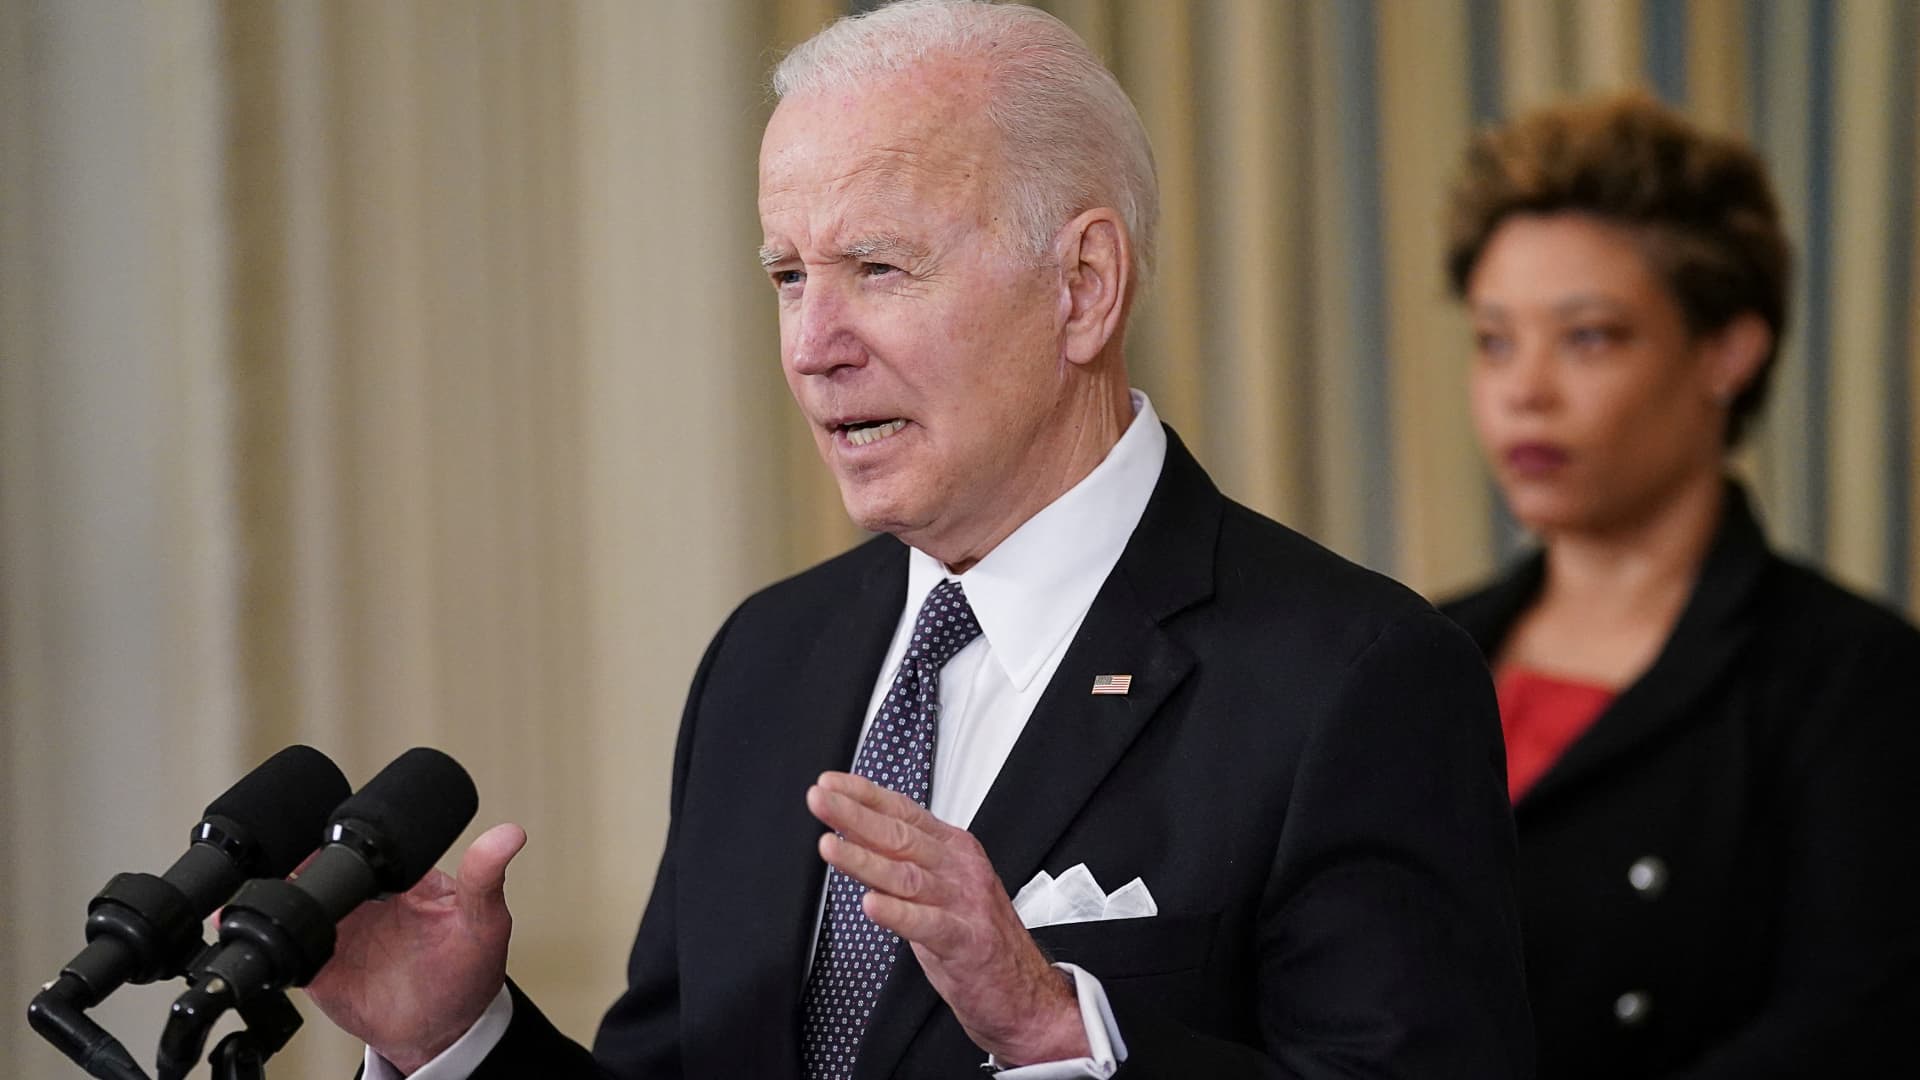 U.S. President Joe Biden announces his budget proposal for fiscal year 2023, as Office of Management and Budget (OMB) Director Shalanda Young listens in the State Dining Room at the White House in Washington, U.S., March 28, 2022.